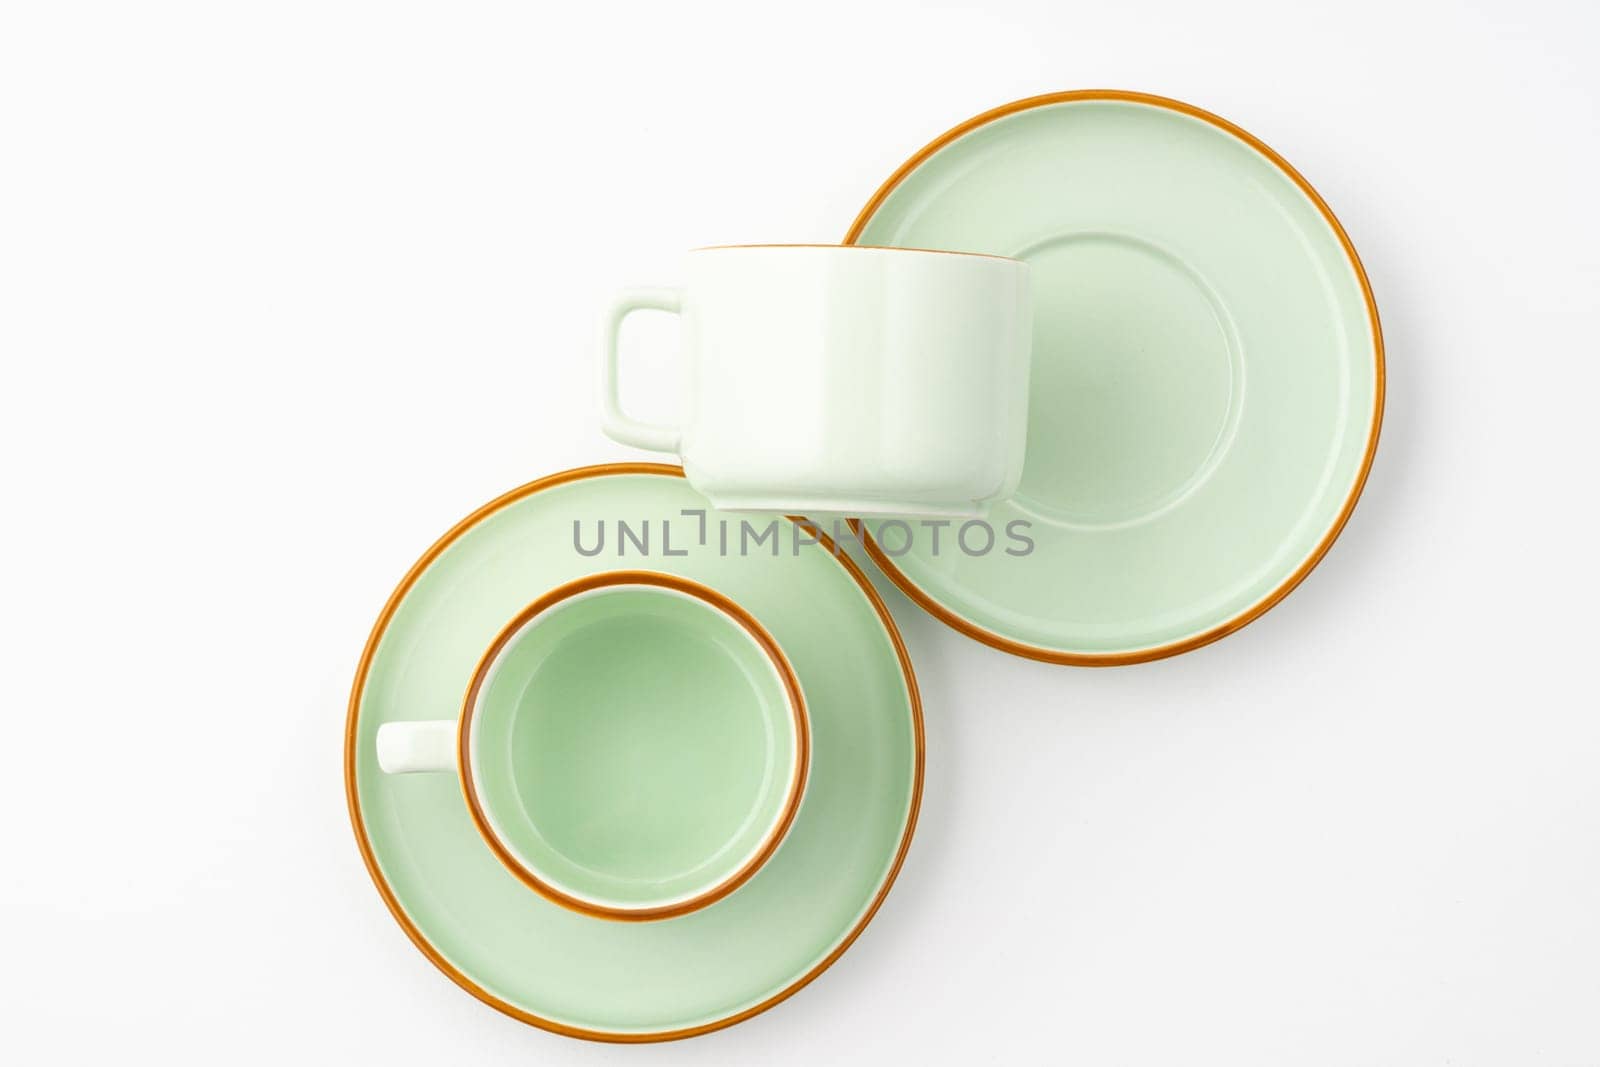 A flat lay of a set of ceramic kitchen utensils such as cups and plates on white background